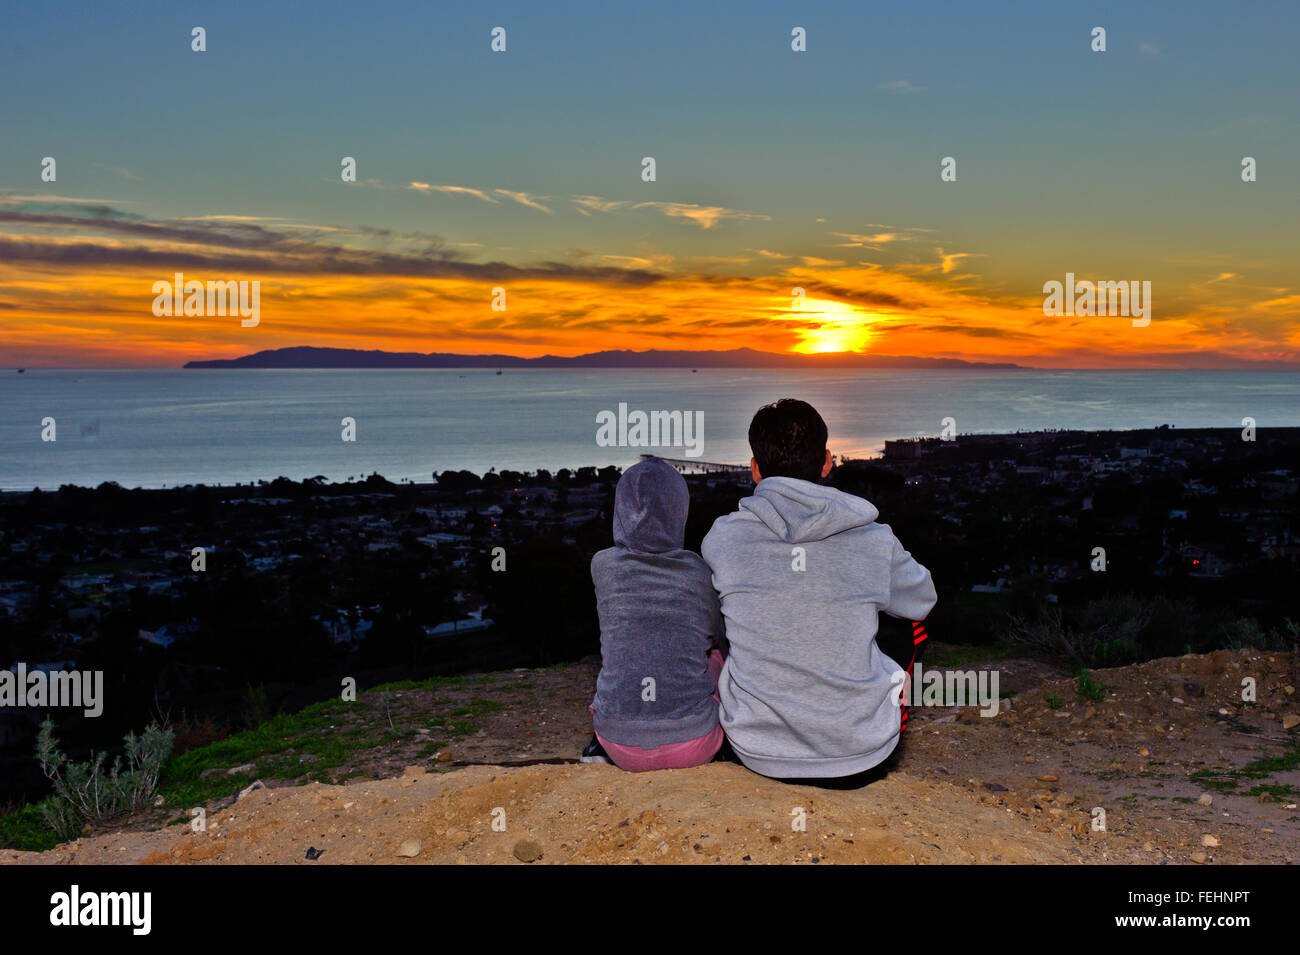 Man and child sitting together watching the sun drop below the horizon. Stock Photo